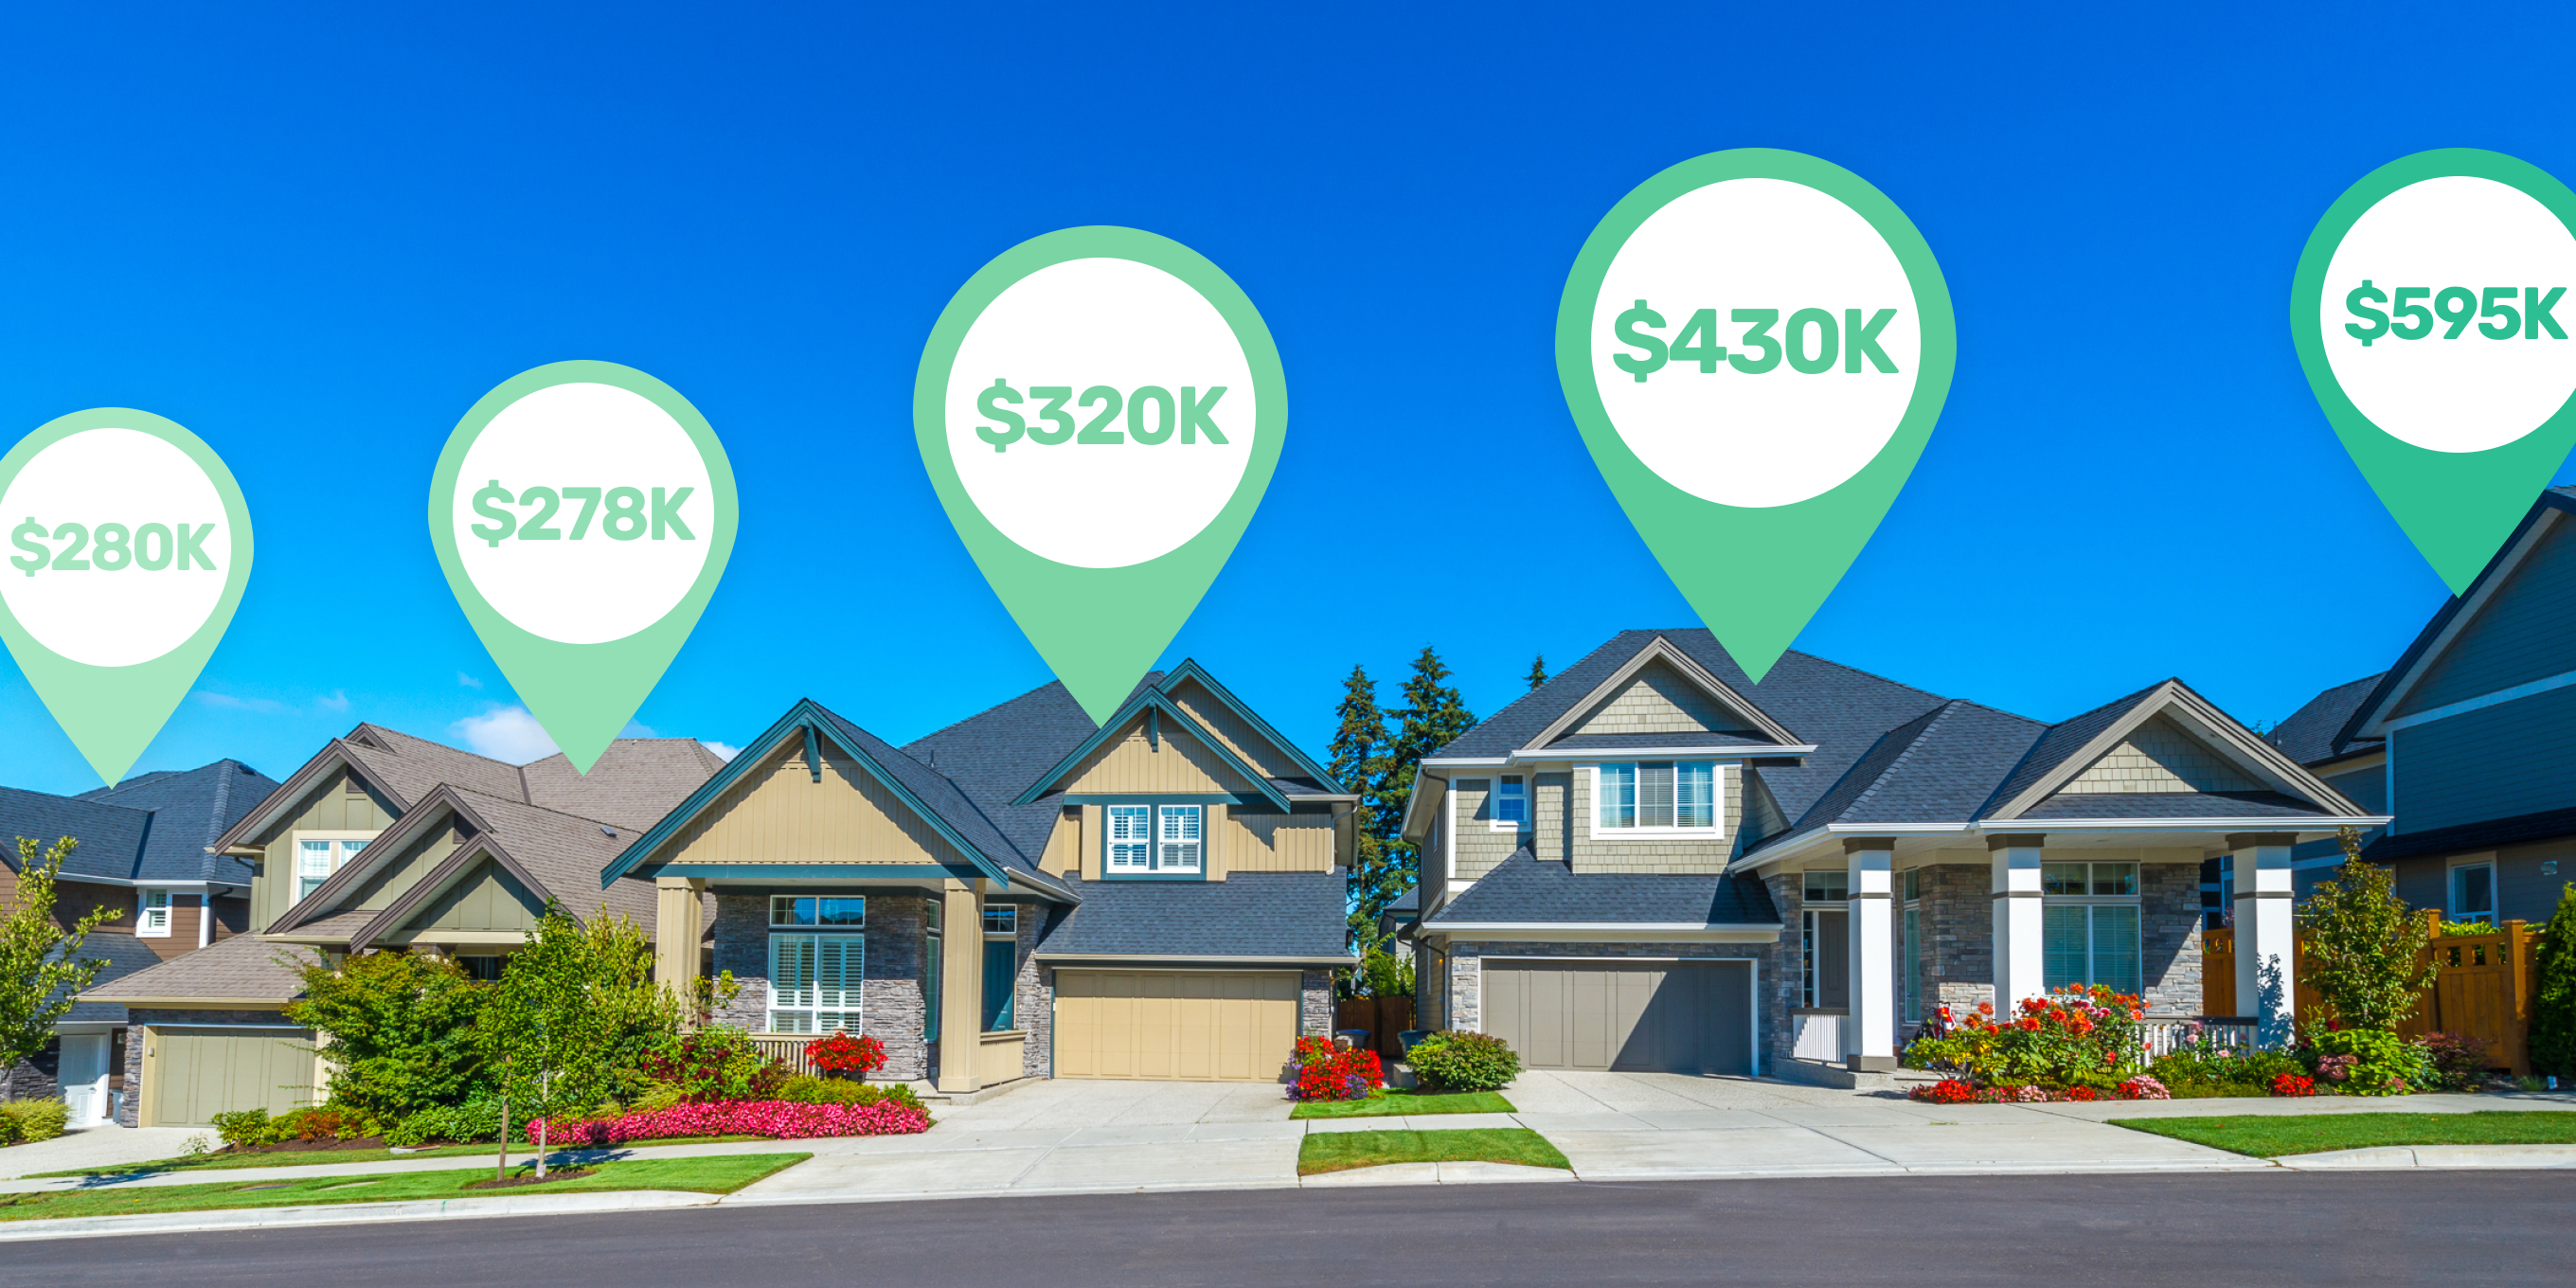 How to Find Out How Much a House Sold For